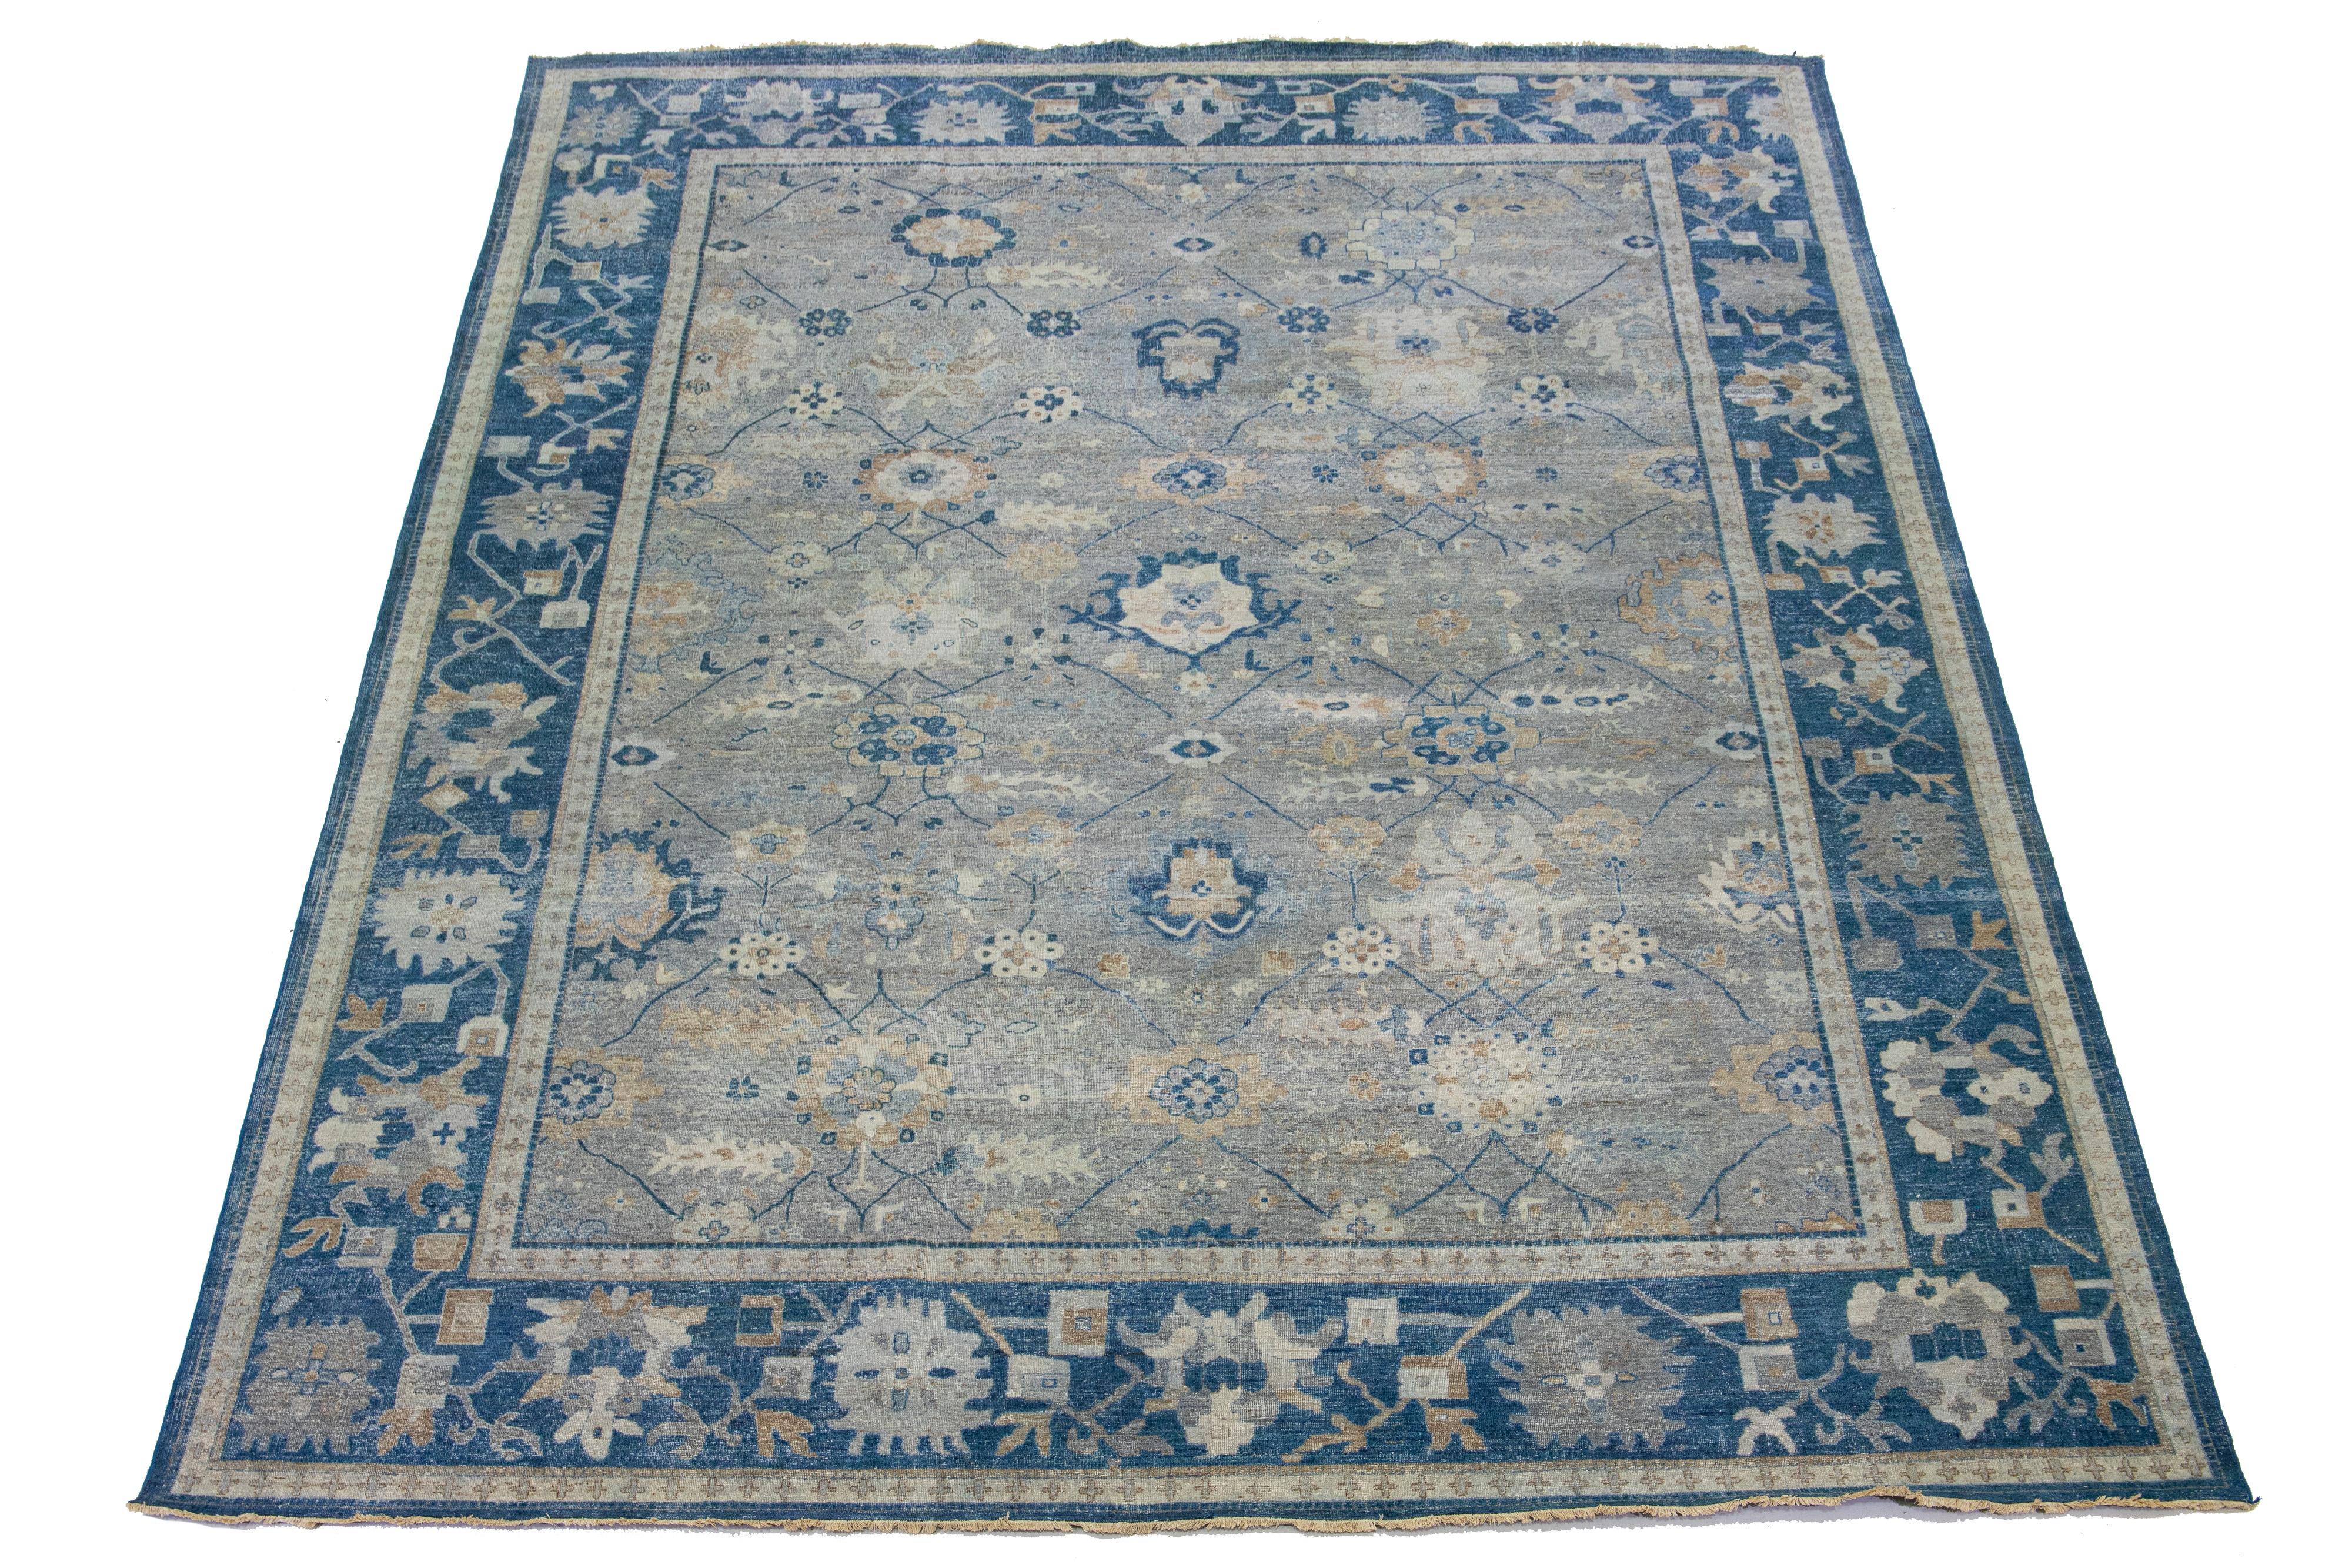 The Artisan line from Apadana infuses an exquisite antique style into any space. This hand-knotted rug exhibits a stunning all-over floral pattern with a gray color scheme and accents of blue. It measures 11' 11